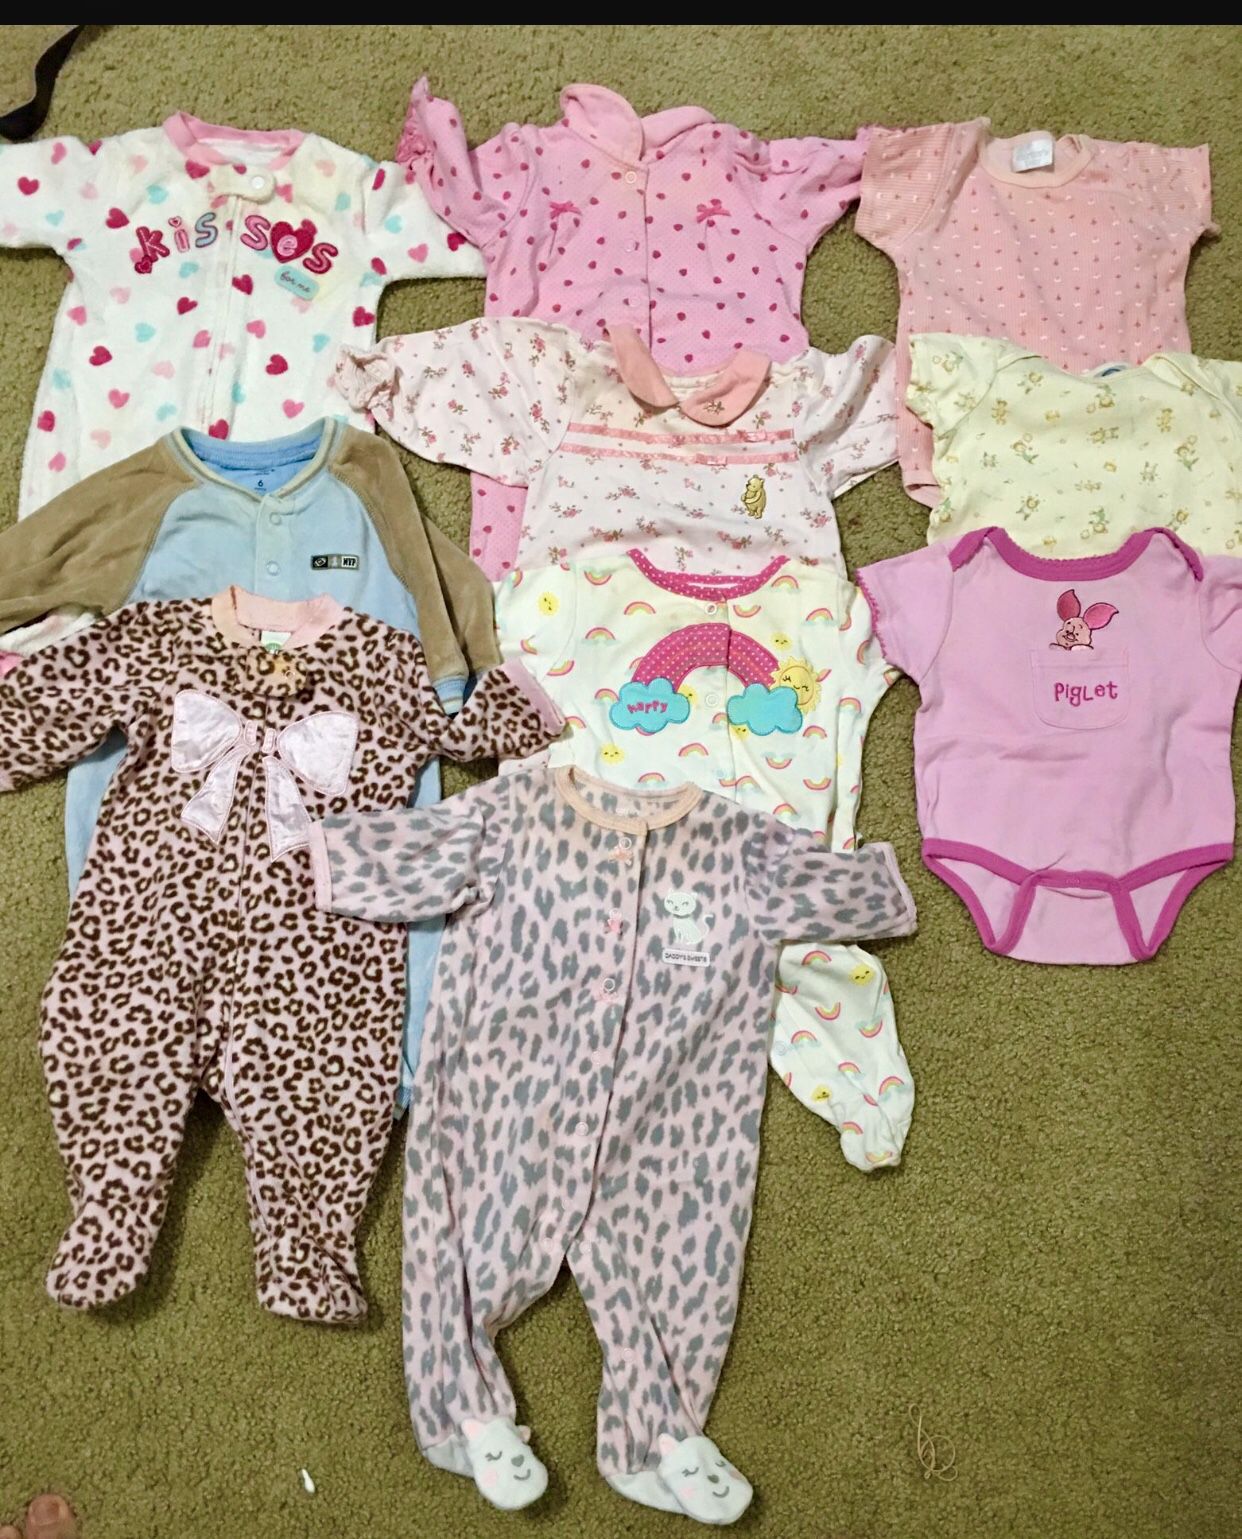 Baby Onesie And Full Body Playsuits, 3-6 Months